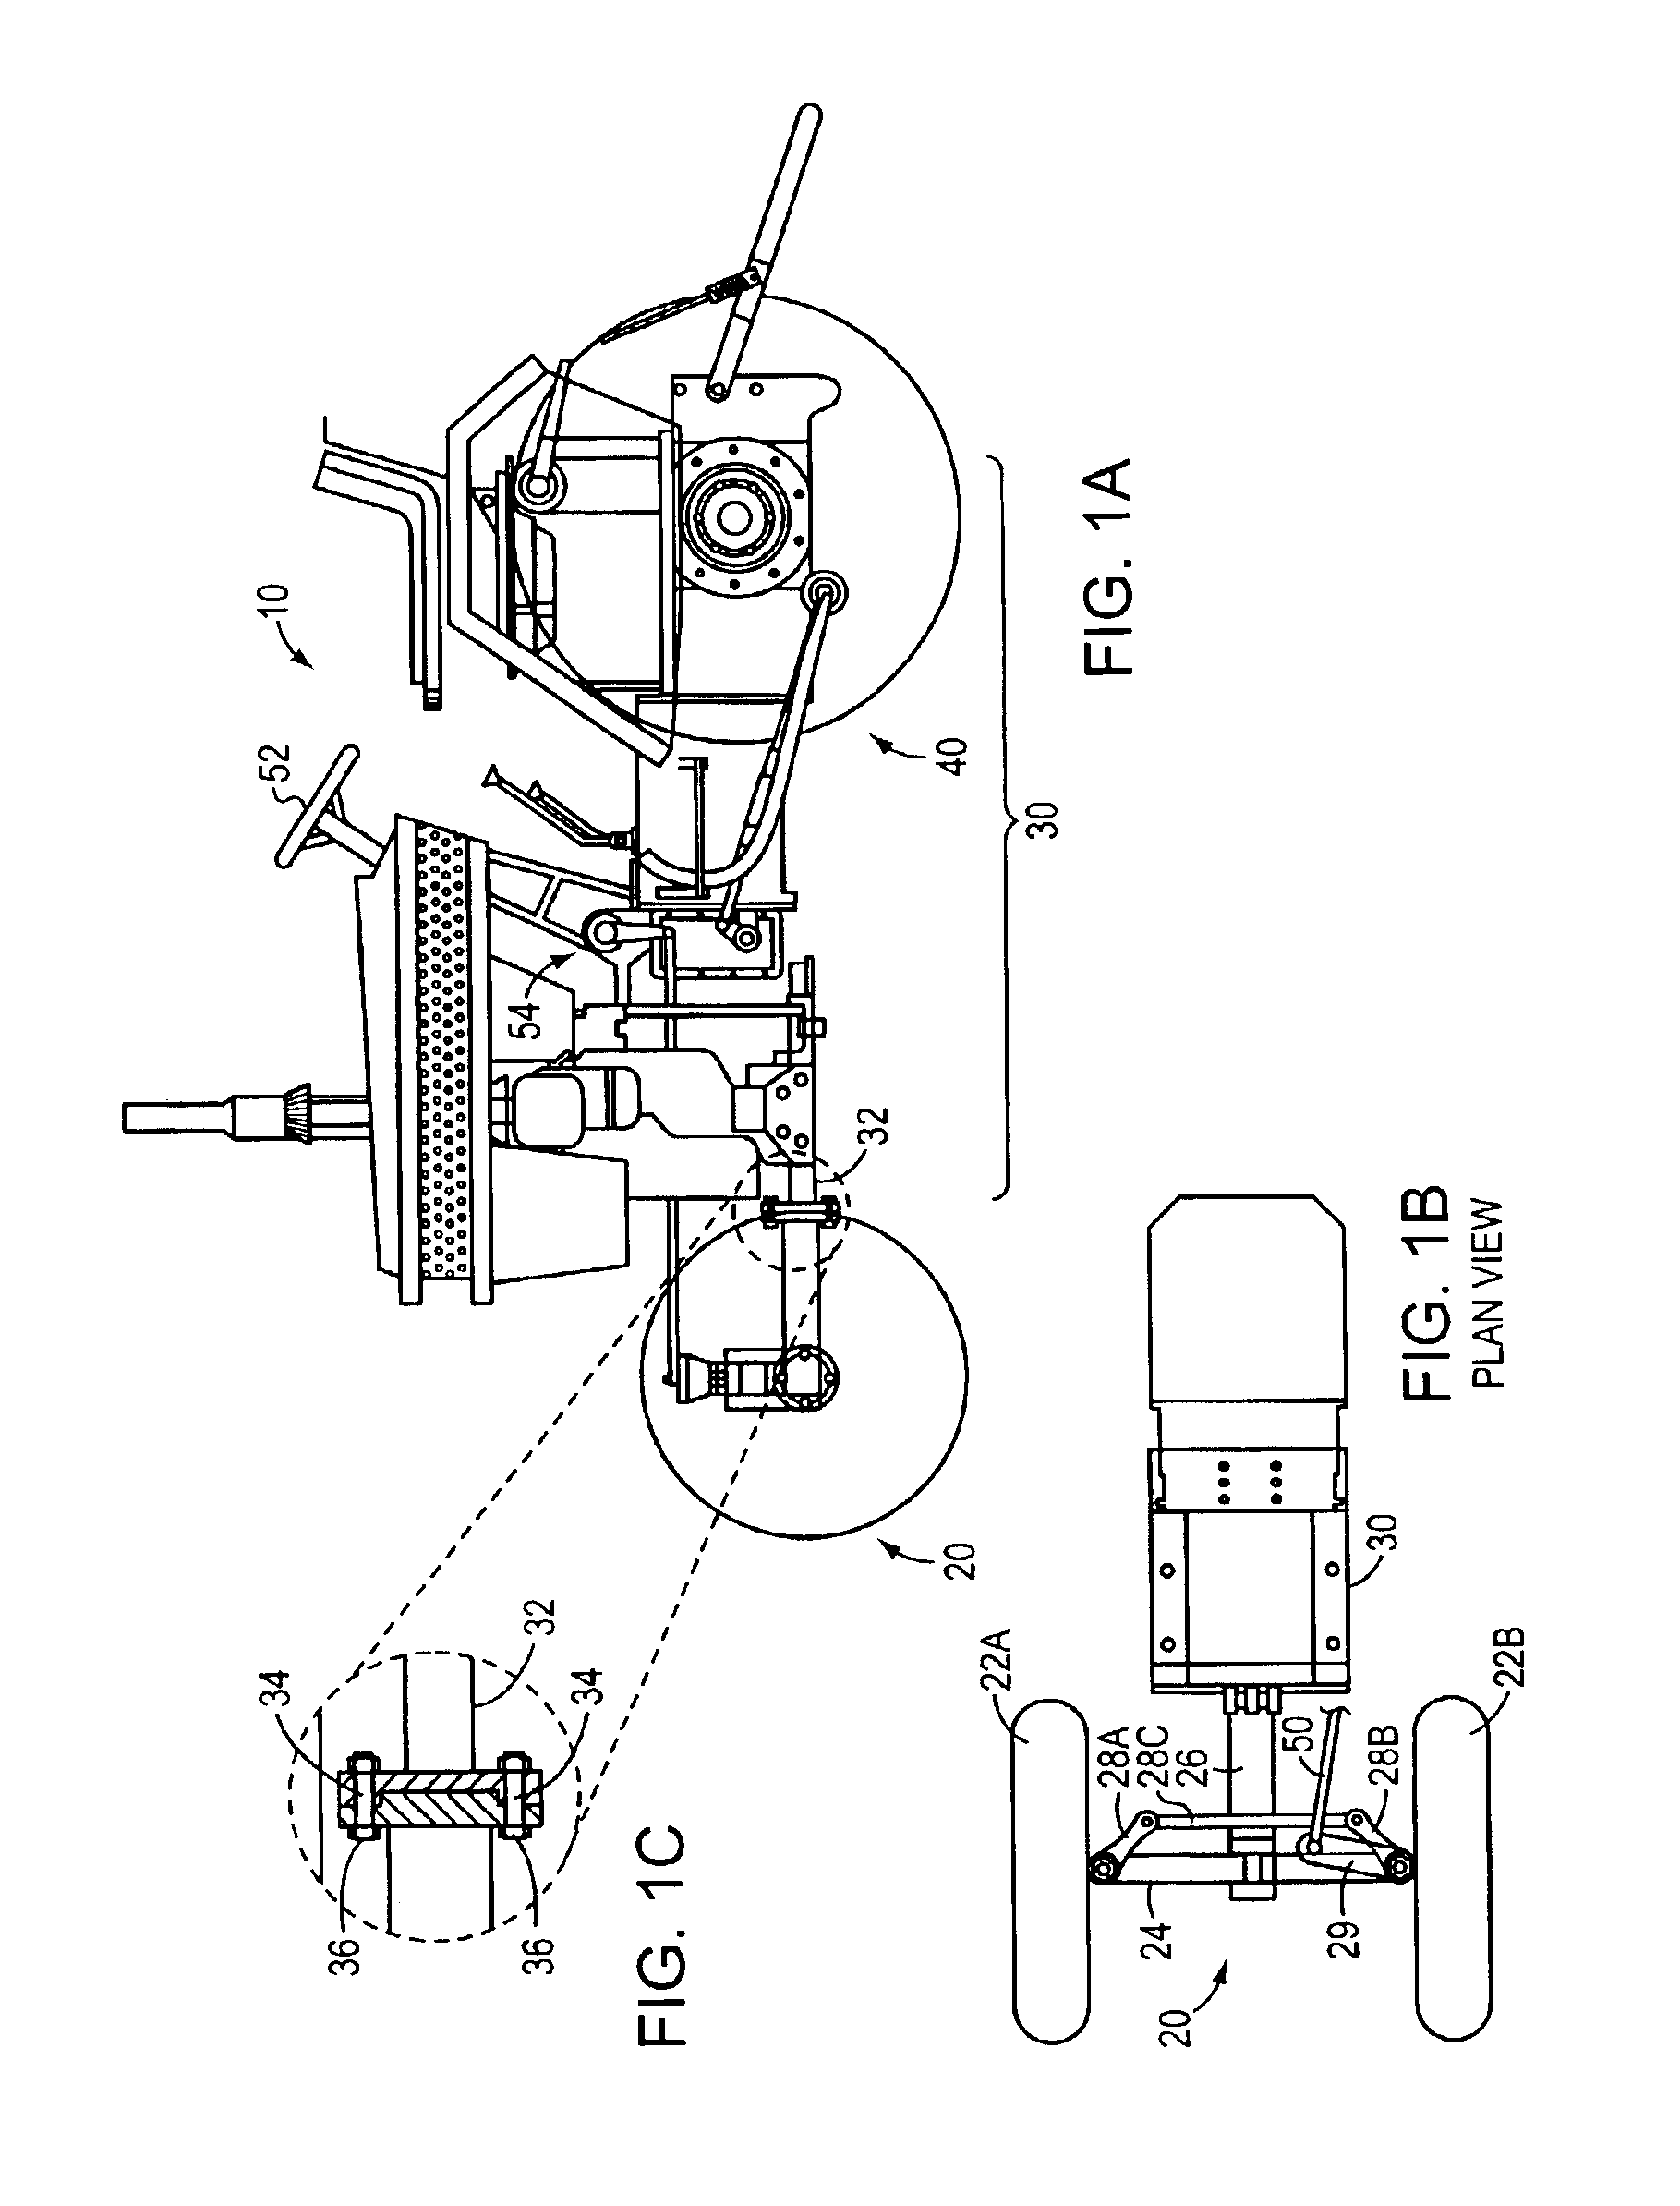 Tractor having a convertible front end and variable track width and related methods